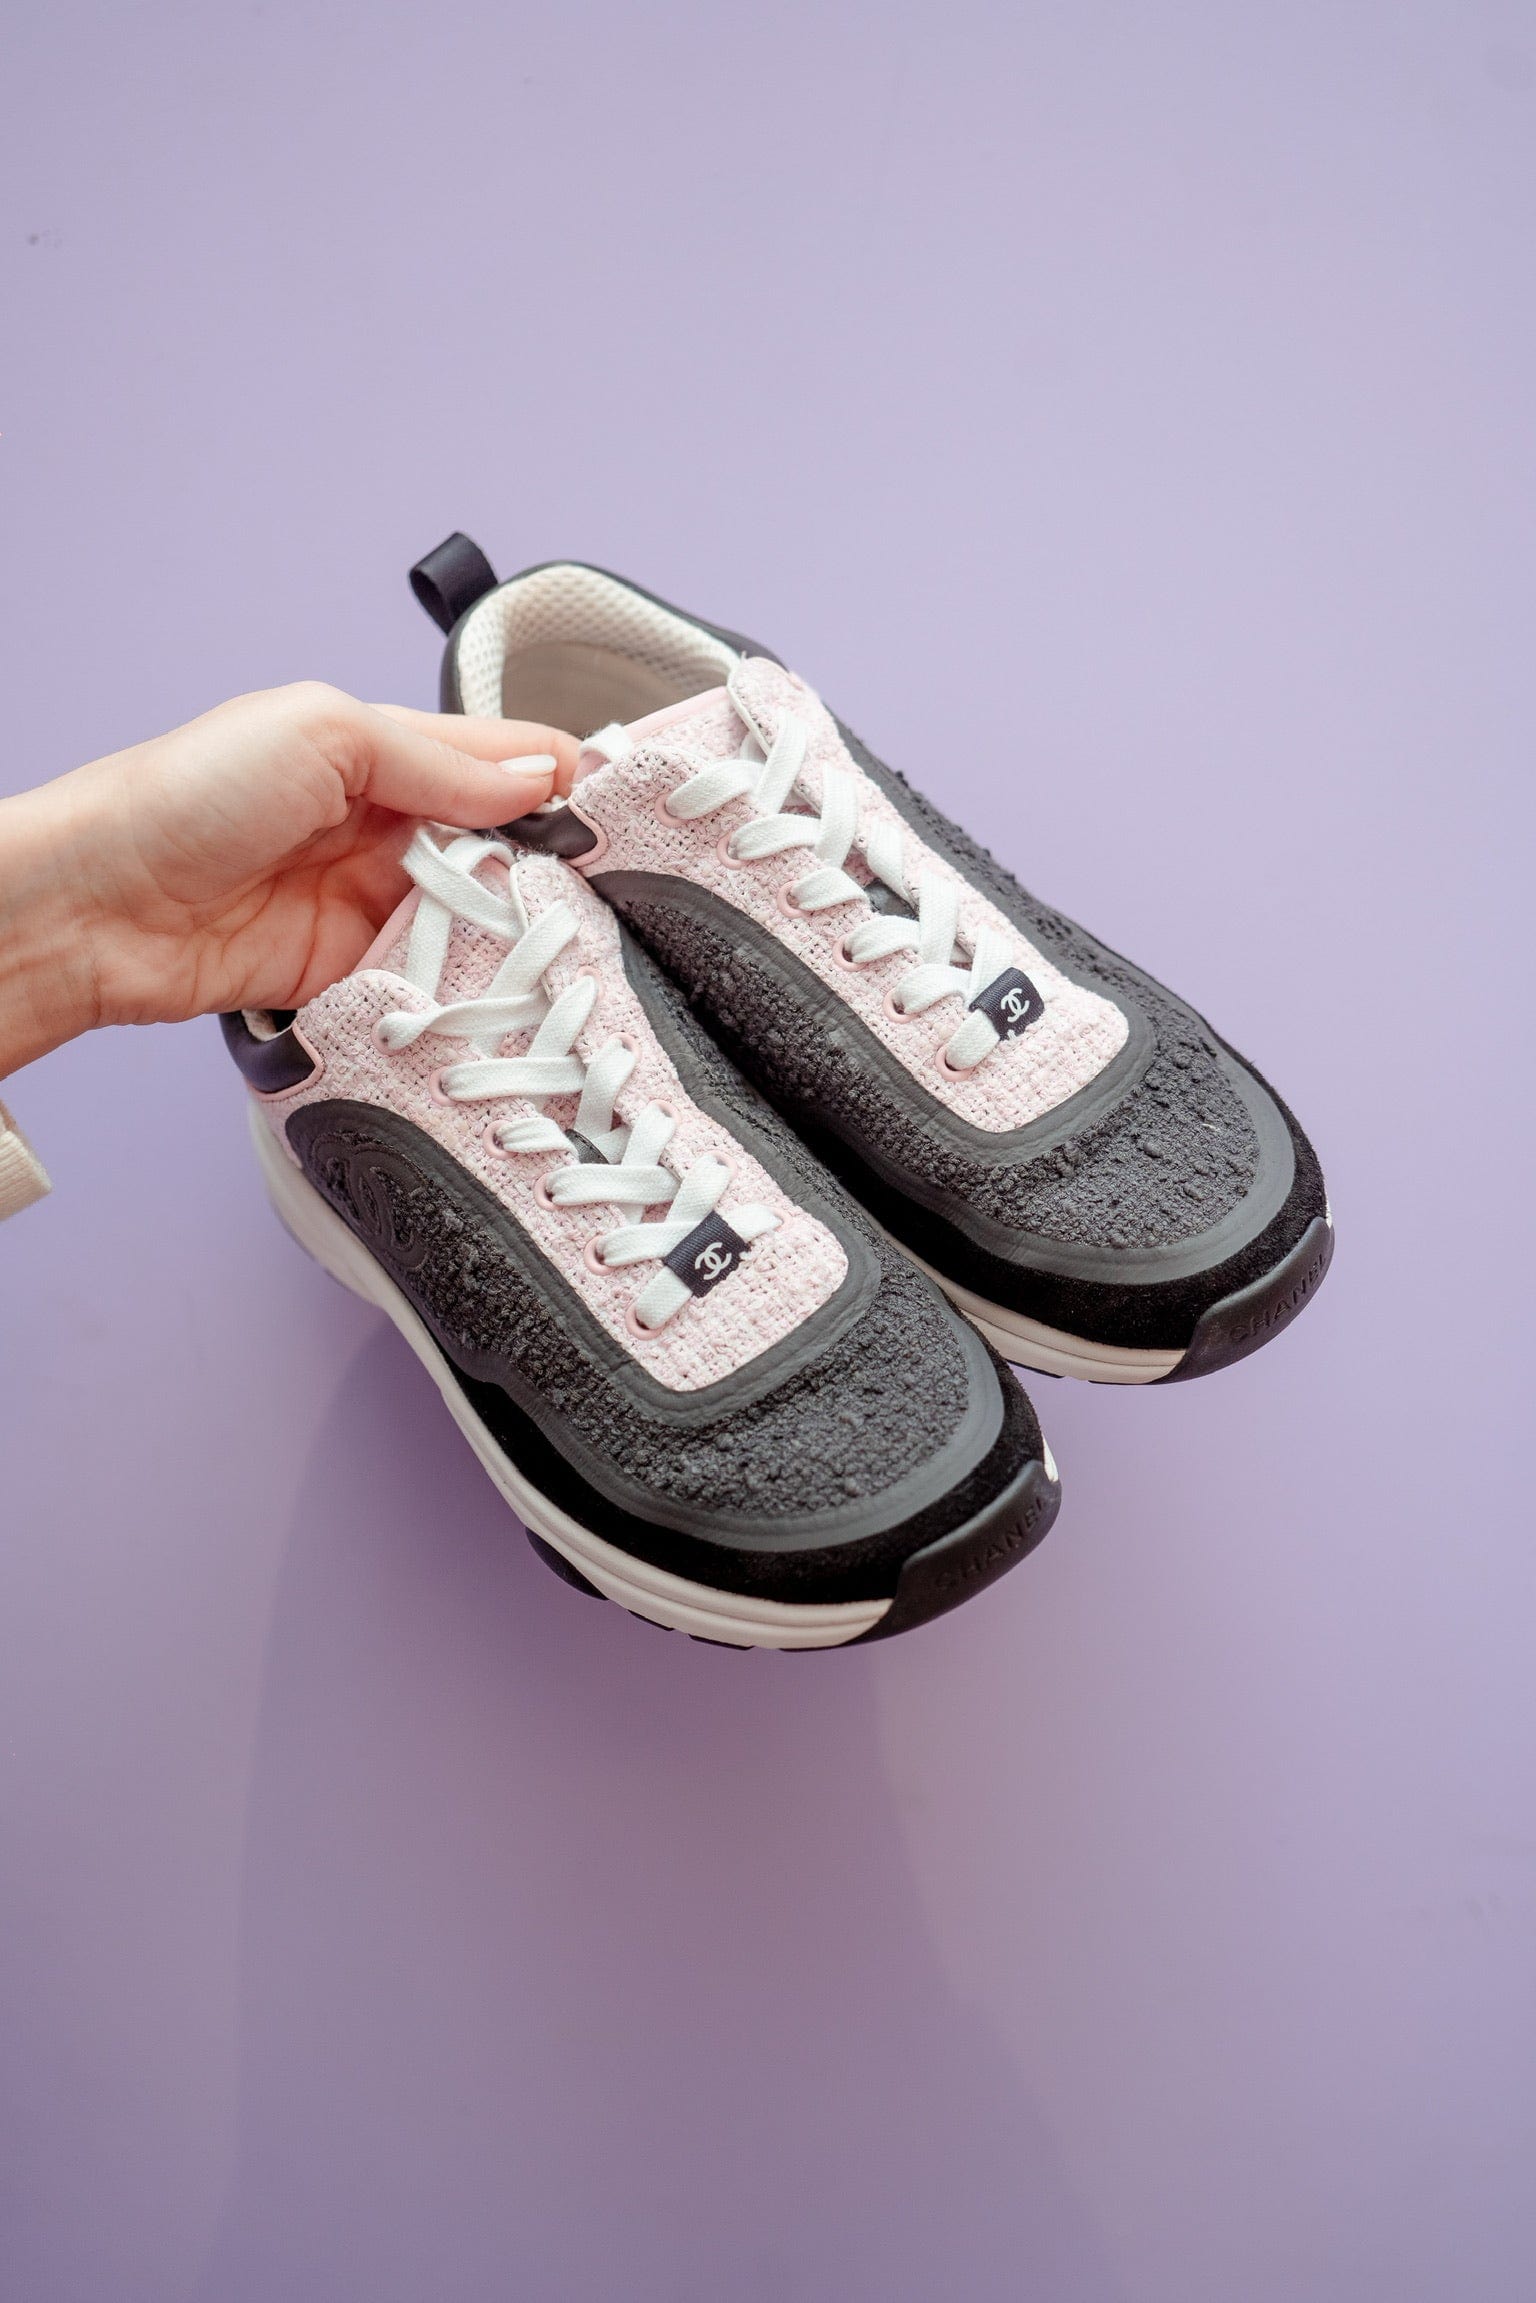 Chanel trainers black, pink and white size 38.5 RJL1345